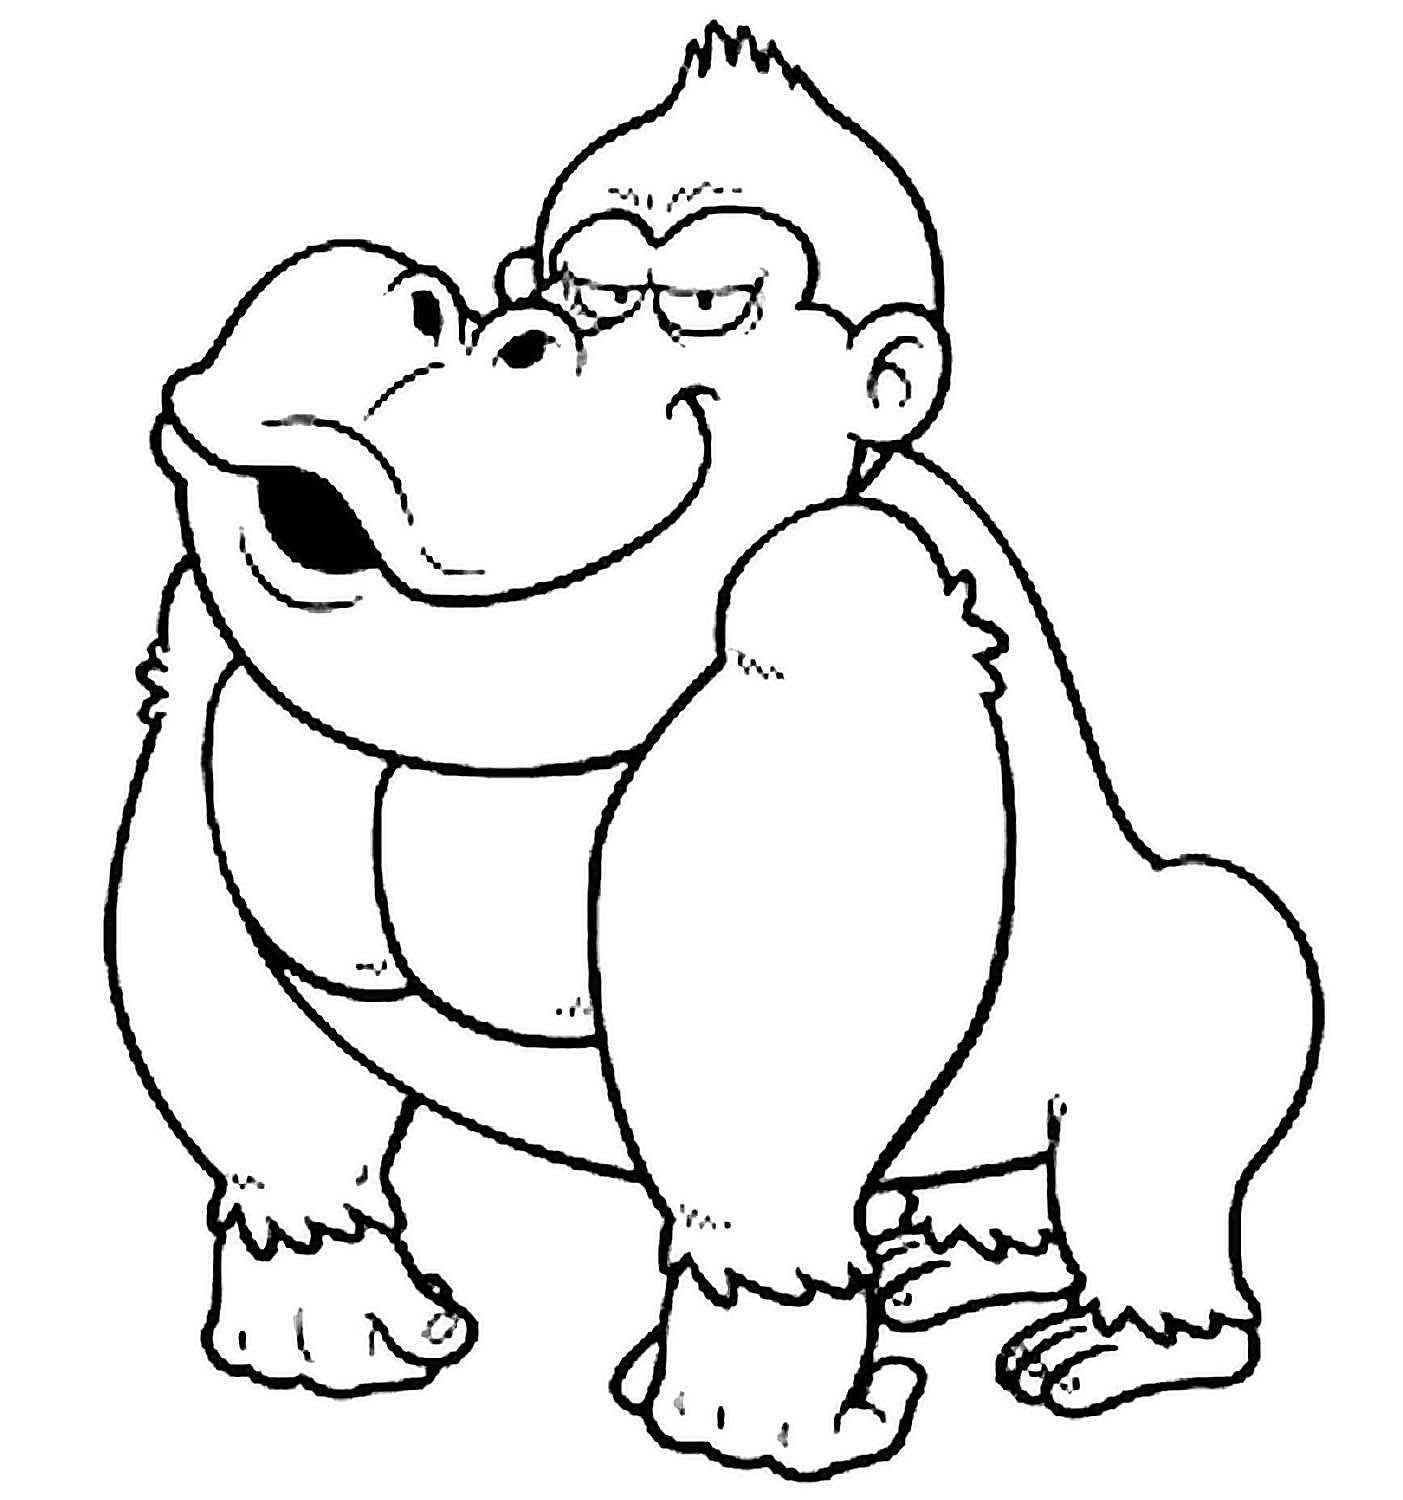 gorilla coloring pages 10 cute free printable gorilla coloring pages online coloring gorilla pages 